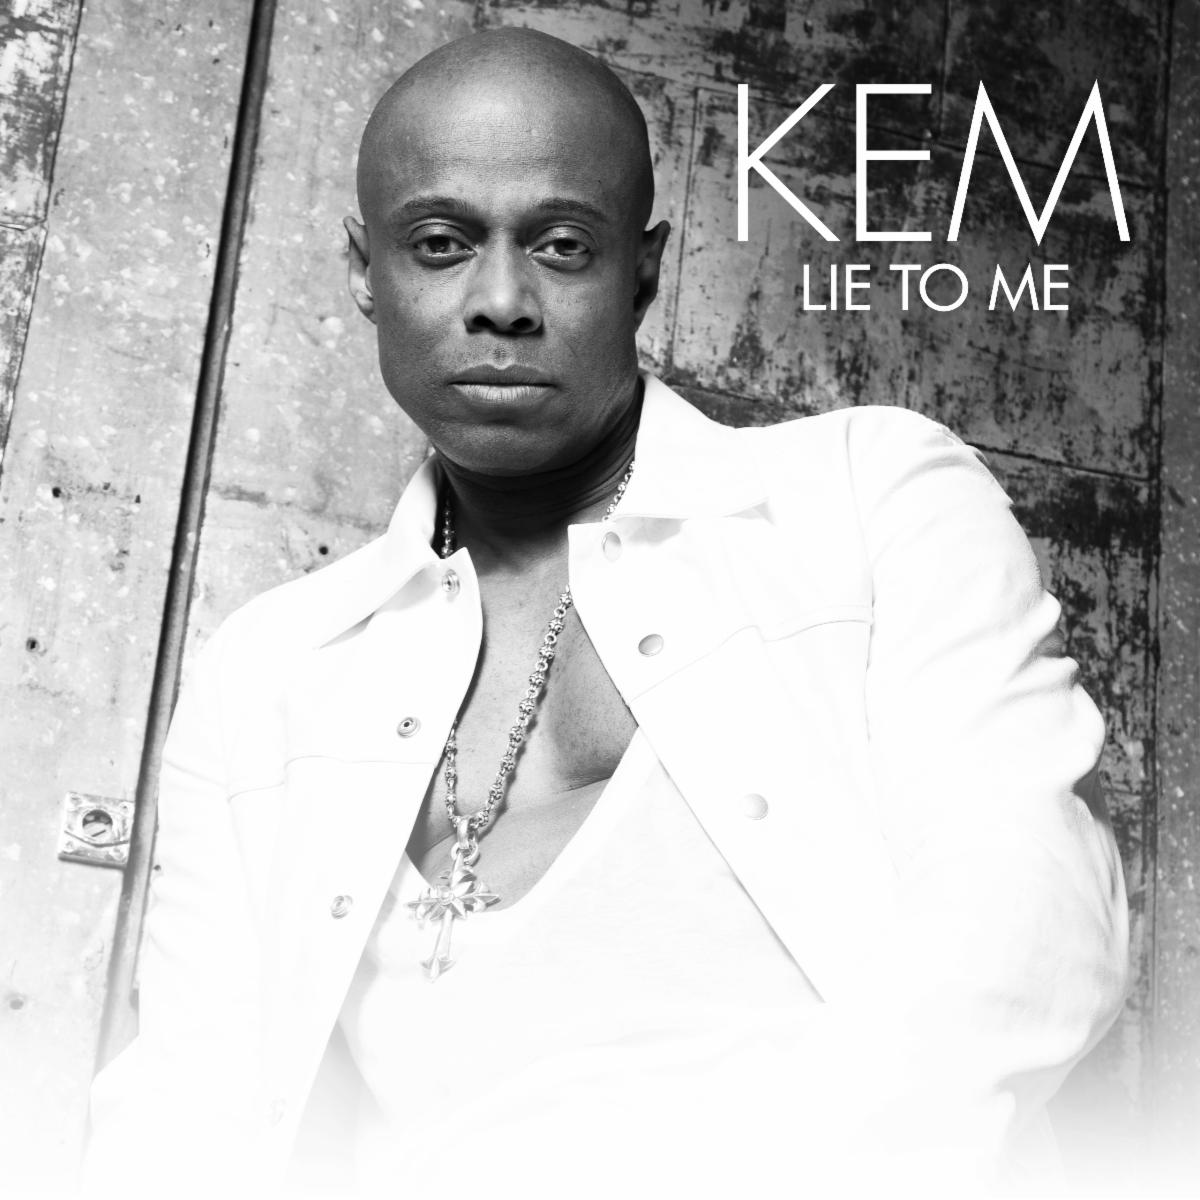 Kem Returns With New Single “Lie to Me” Co-Written by Anthony Hamilton, Salaam Remi, James Poyser